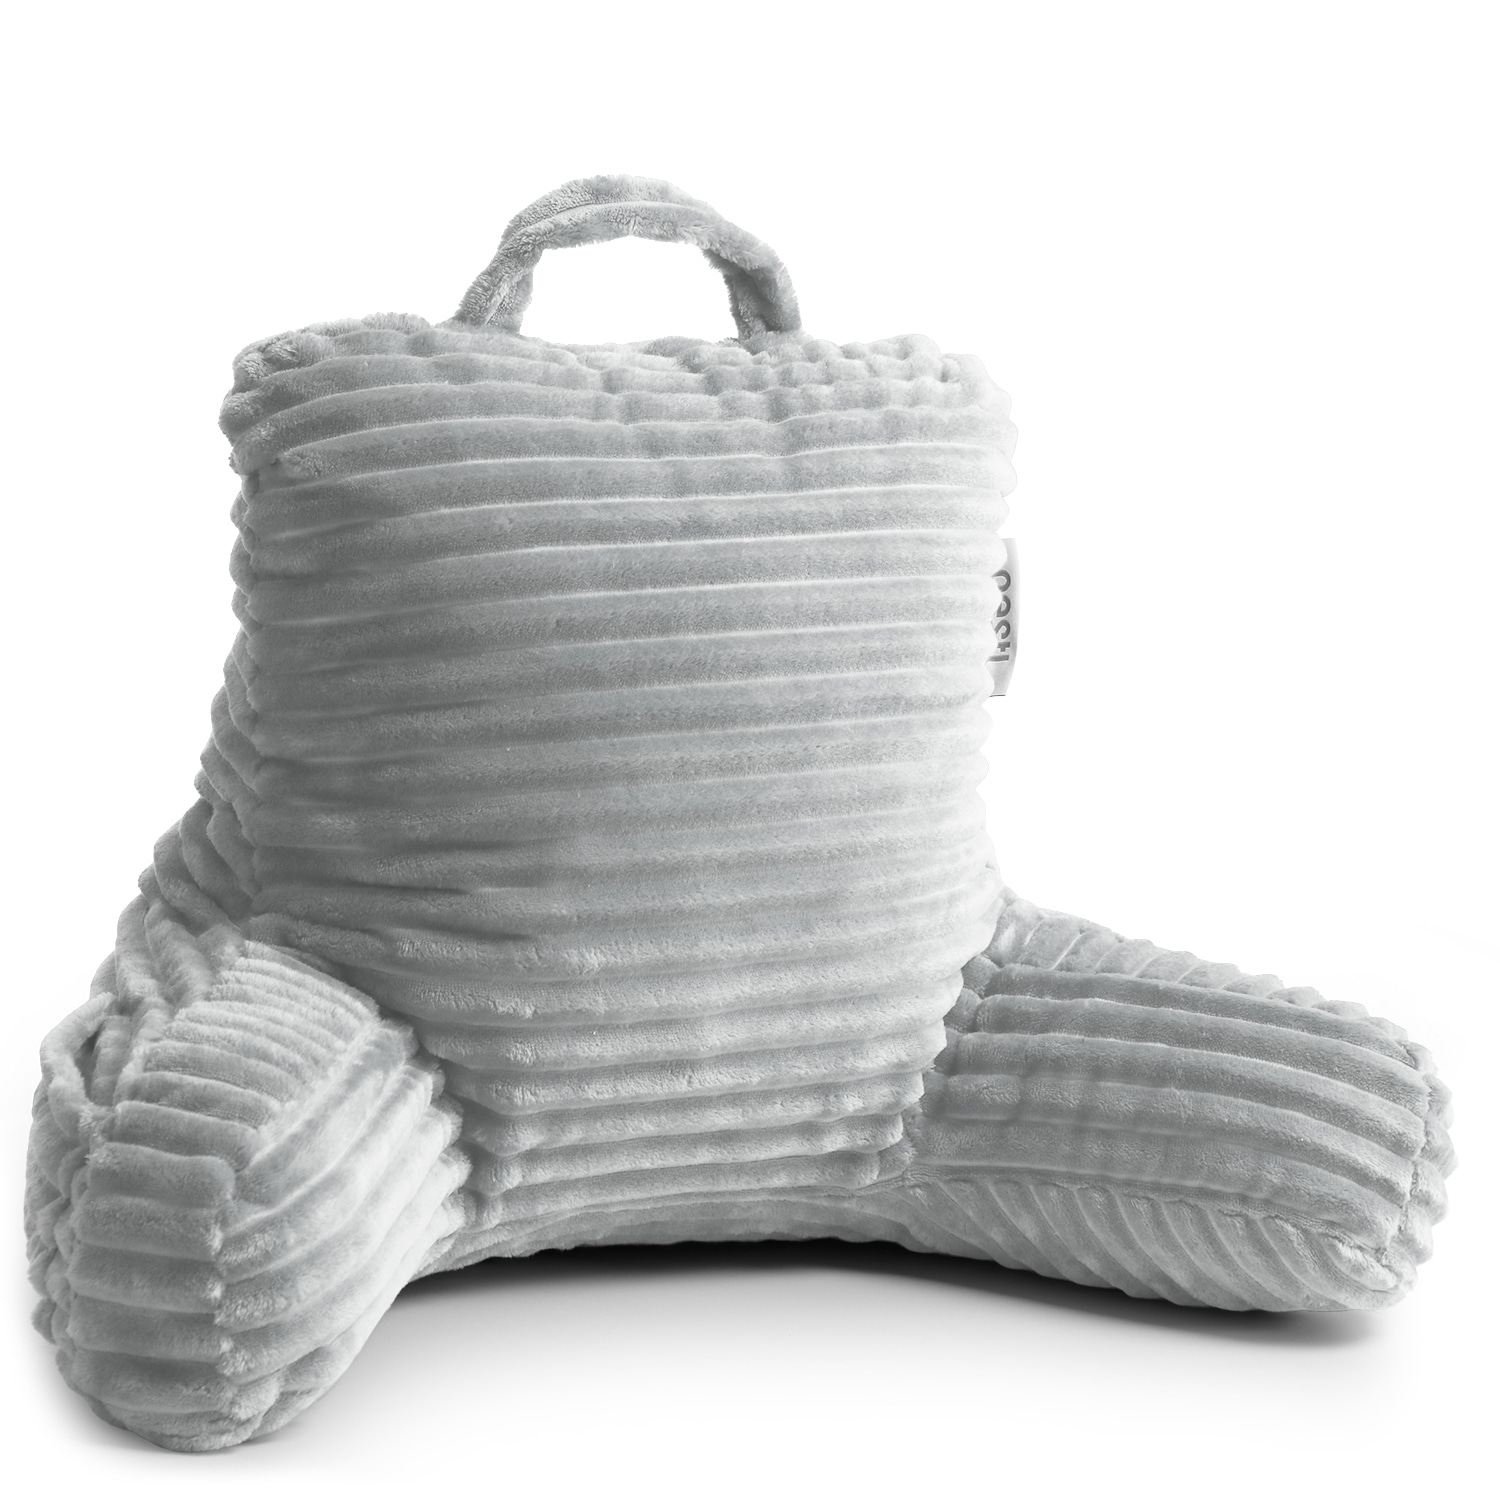 https://ak1.ostkcdn.com/images/products/is/images/direct/9b8338535e8bc0e961bd41fdebbe395f58cd062f/Nestl-Cut-Plush-Striped-Reading-Pillow---Back-Support-Shredded-Memory-Foam-Bed-Rest-Pillow-with-Arms.jpg